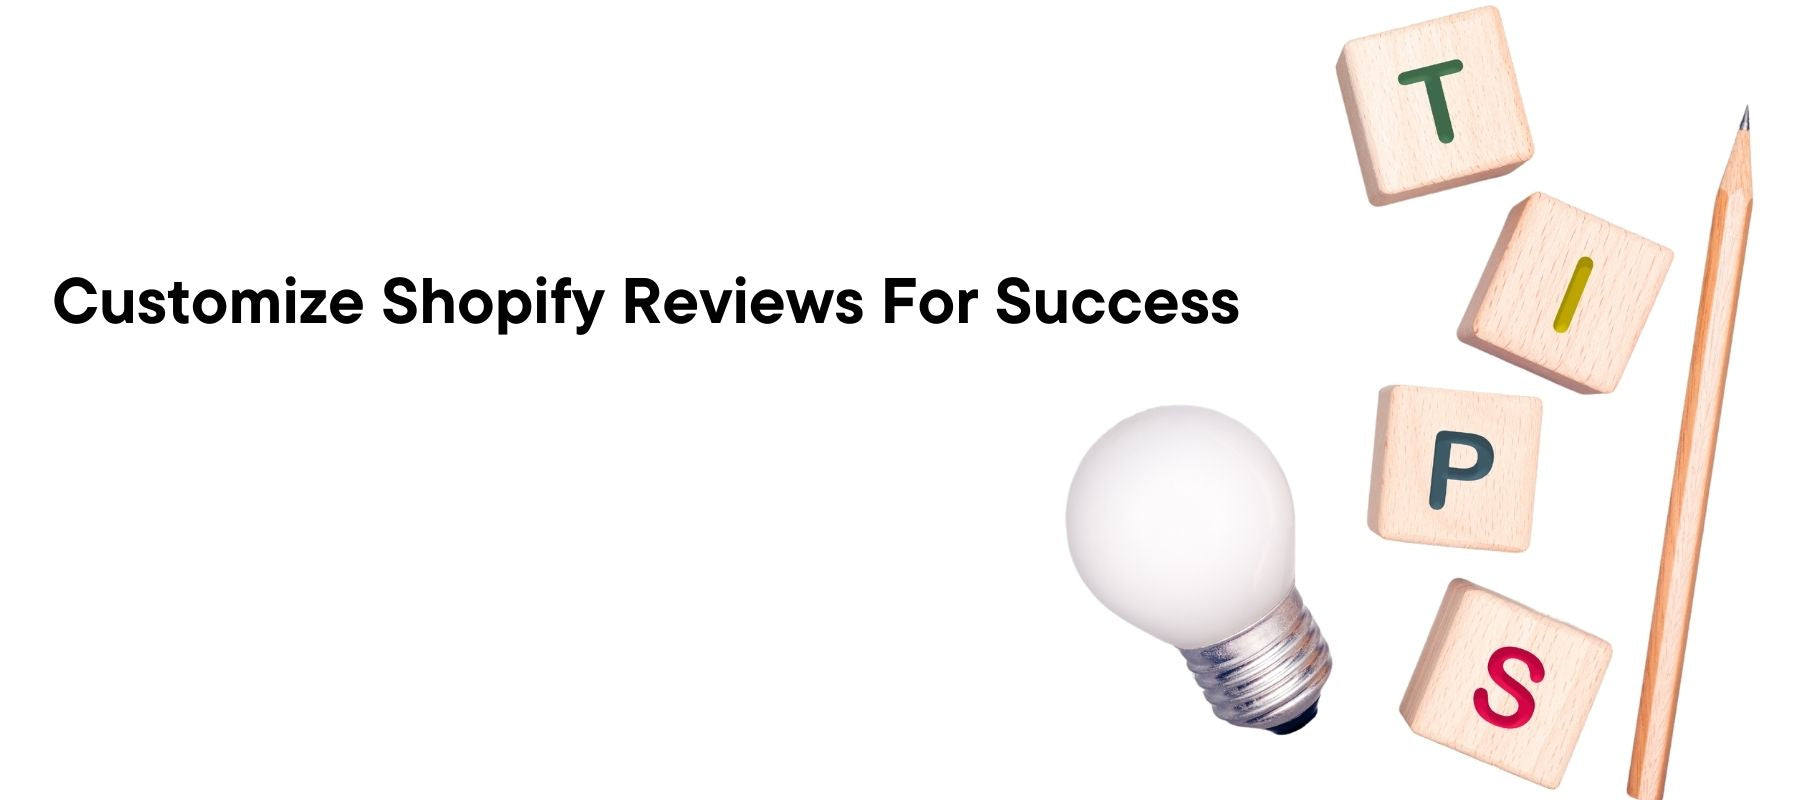 Tips For Customize Shopify Reviews For Success